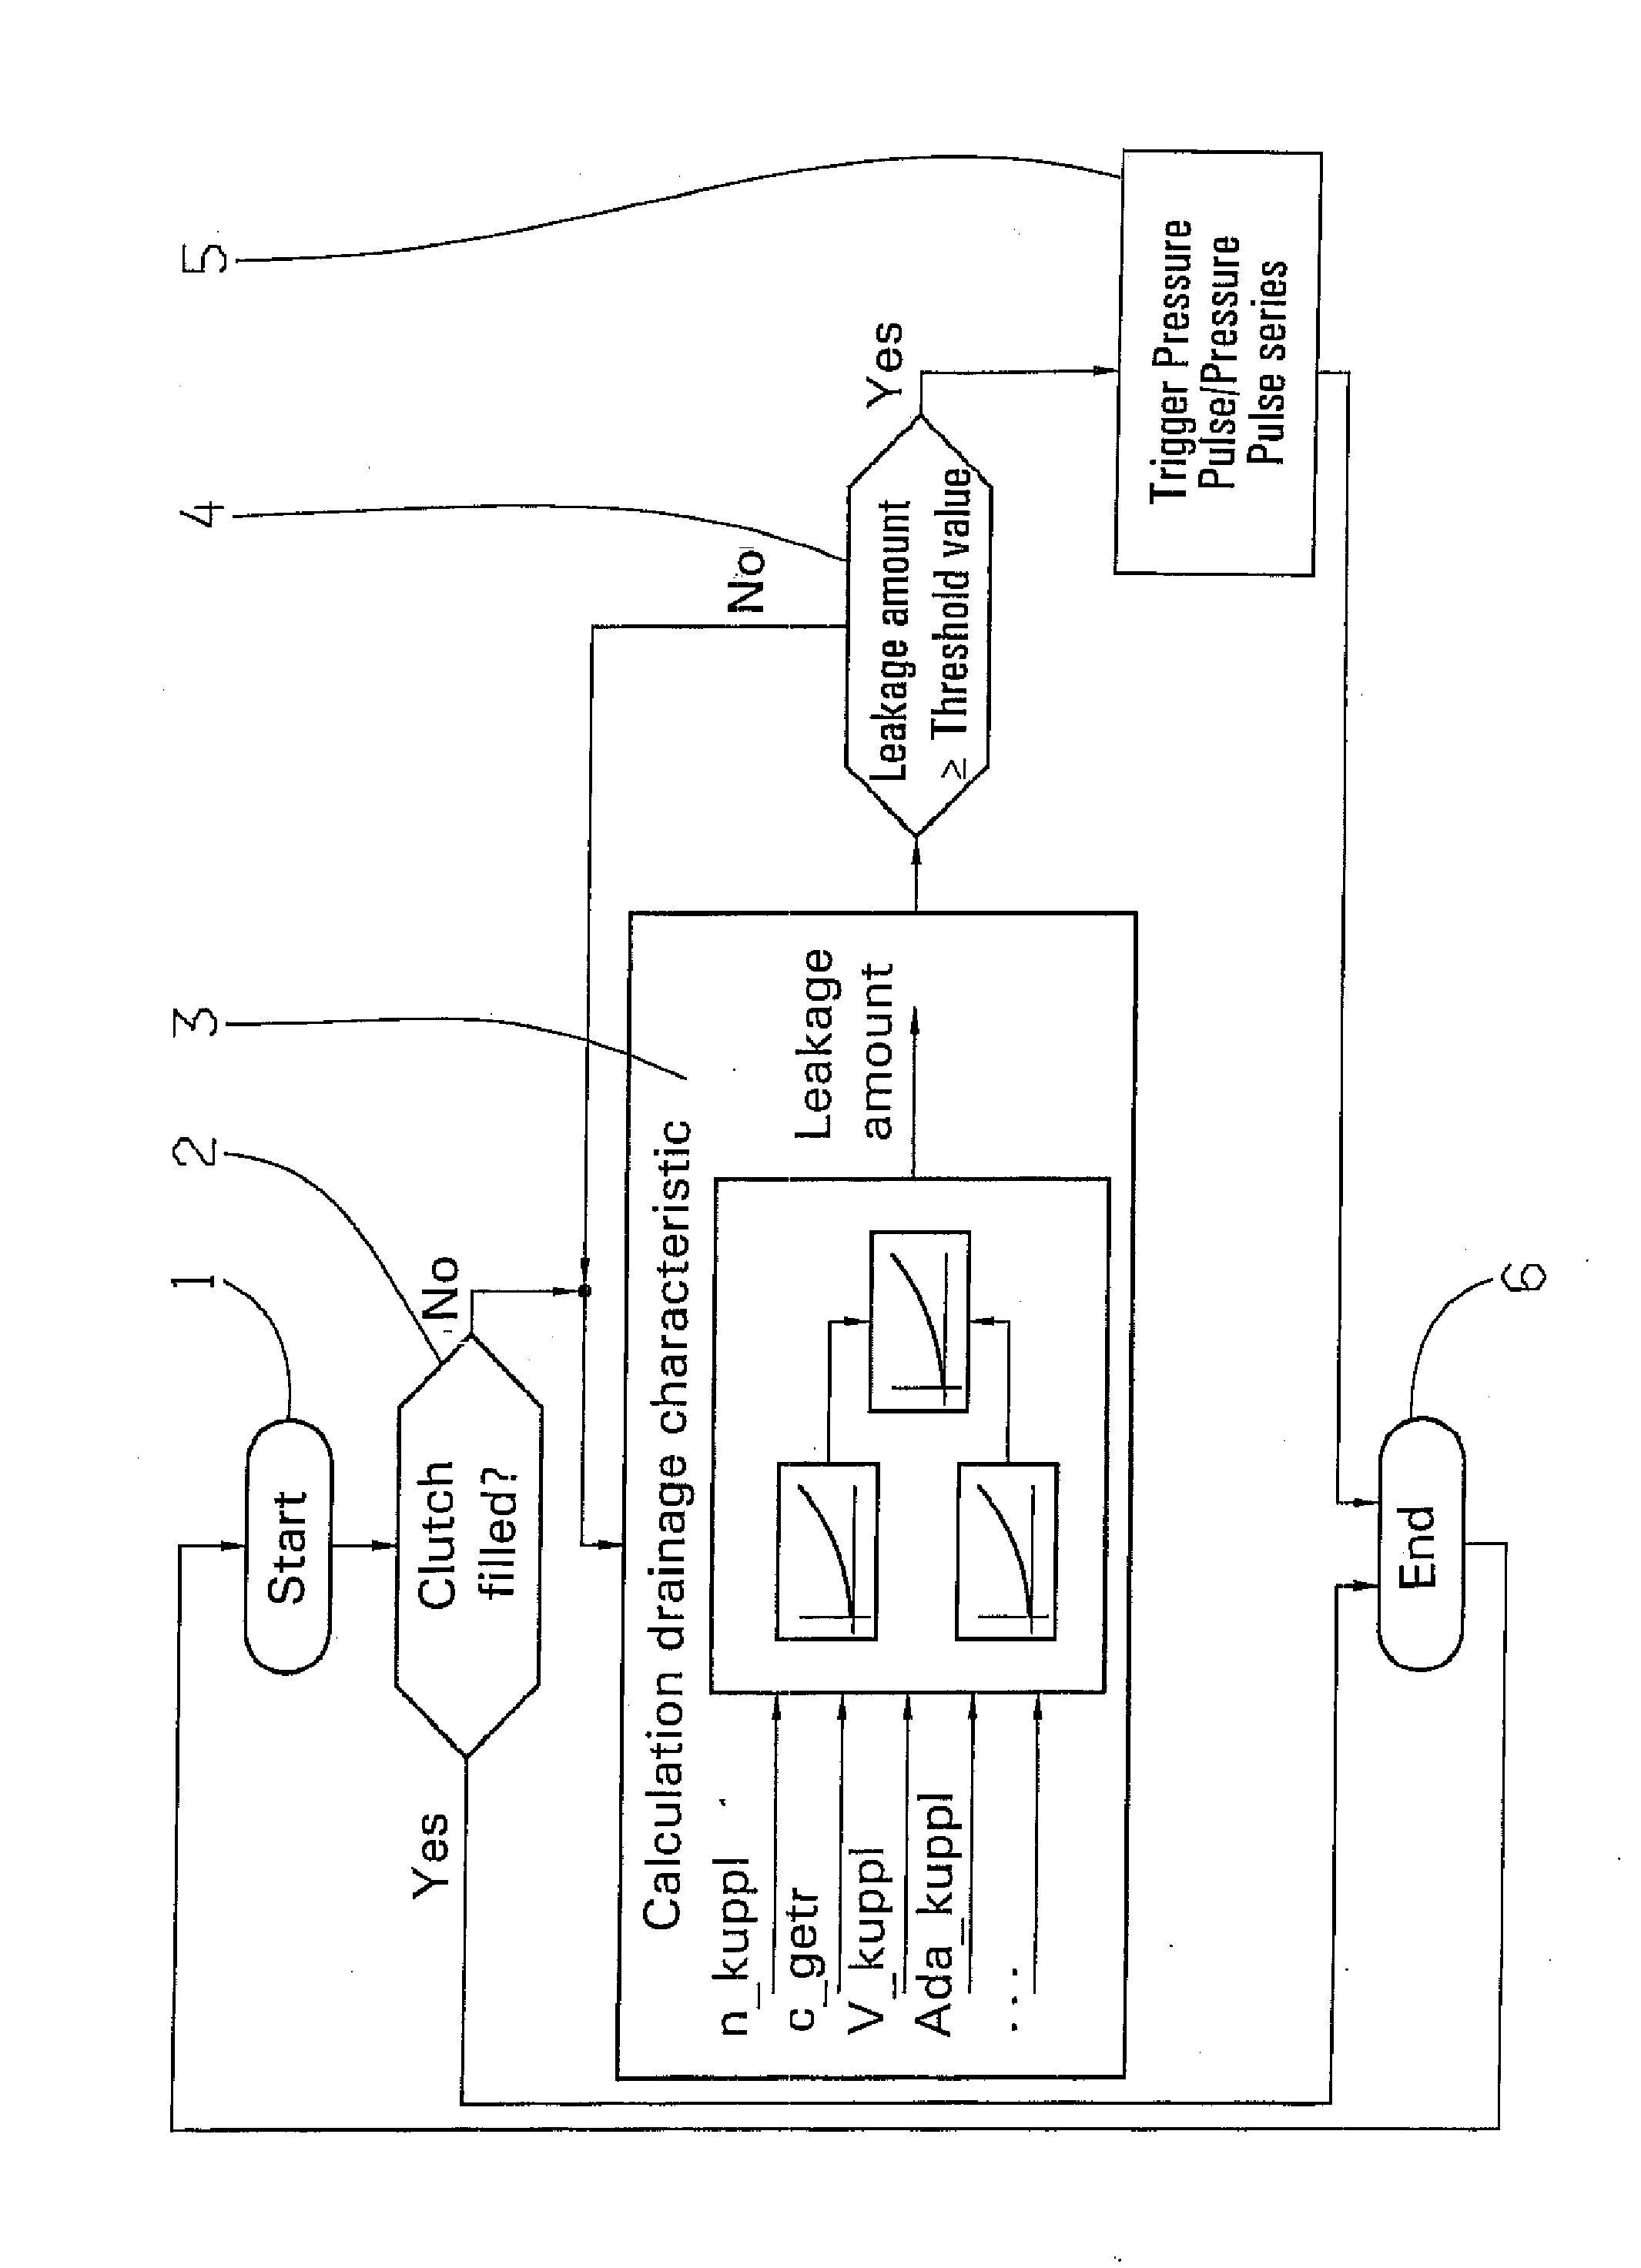 Process for pressure actuation of a shifting element